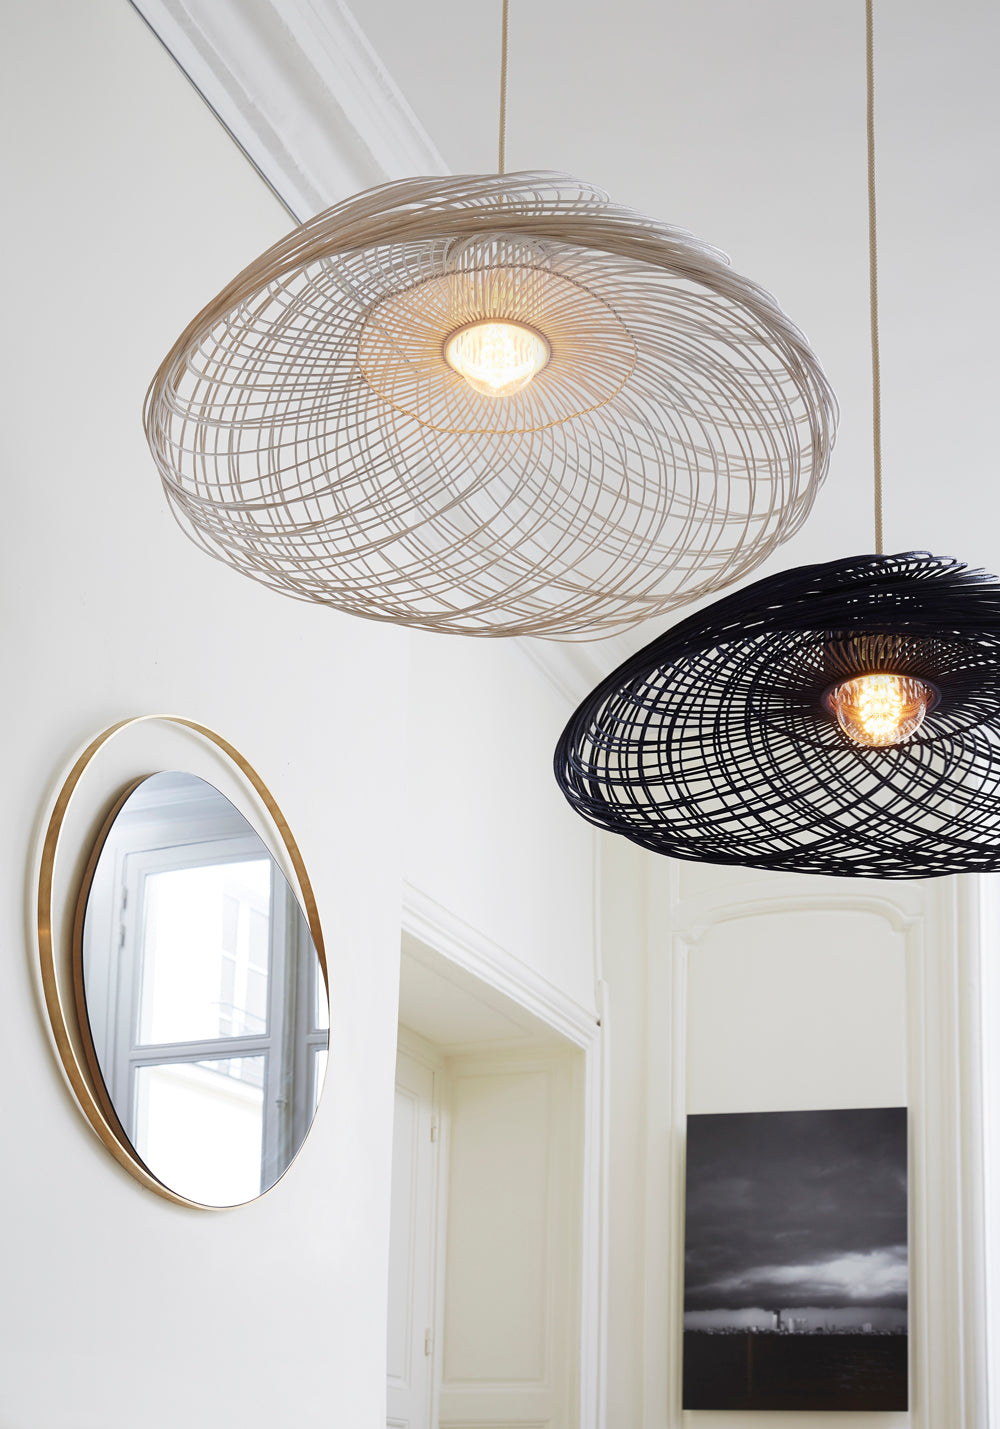 Satelise Small Pendant Light by Forestier